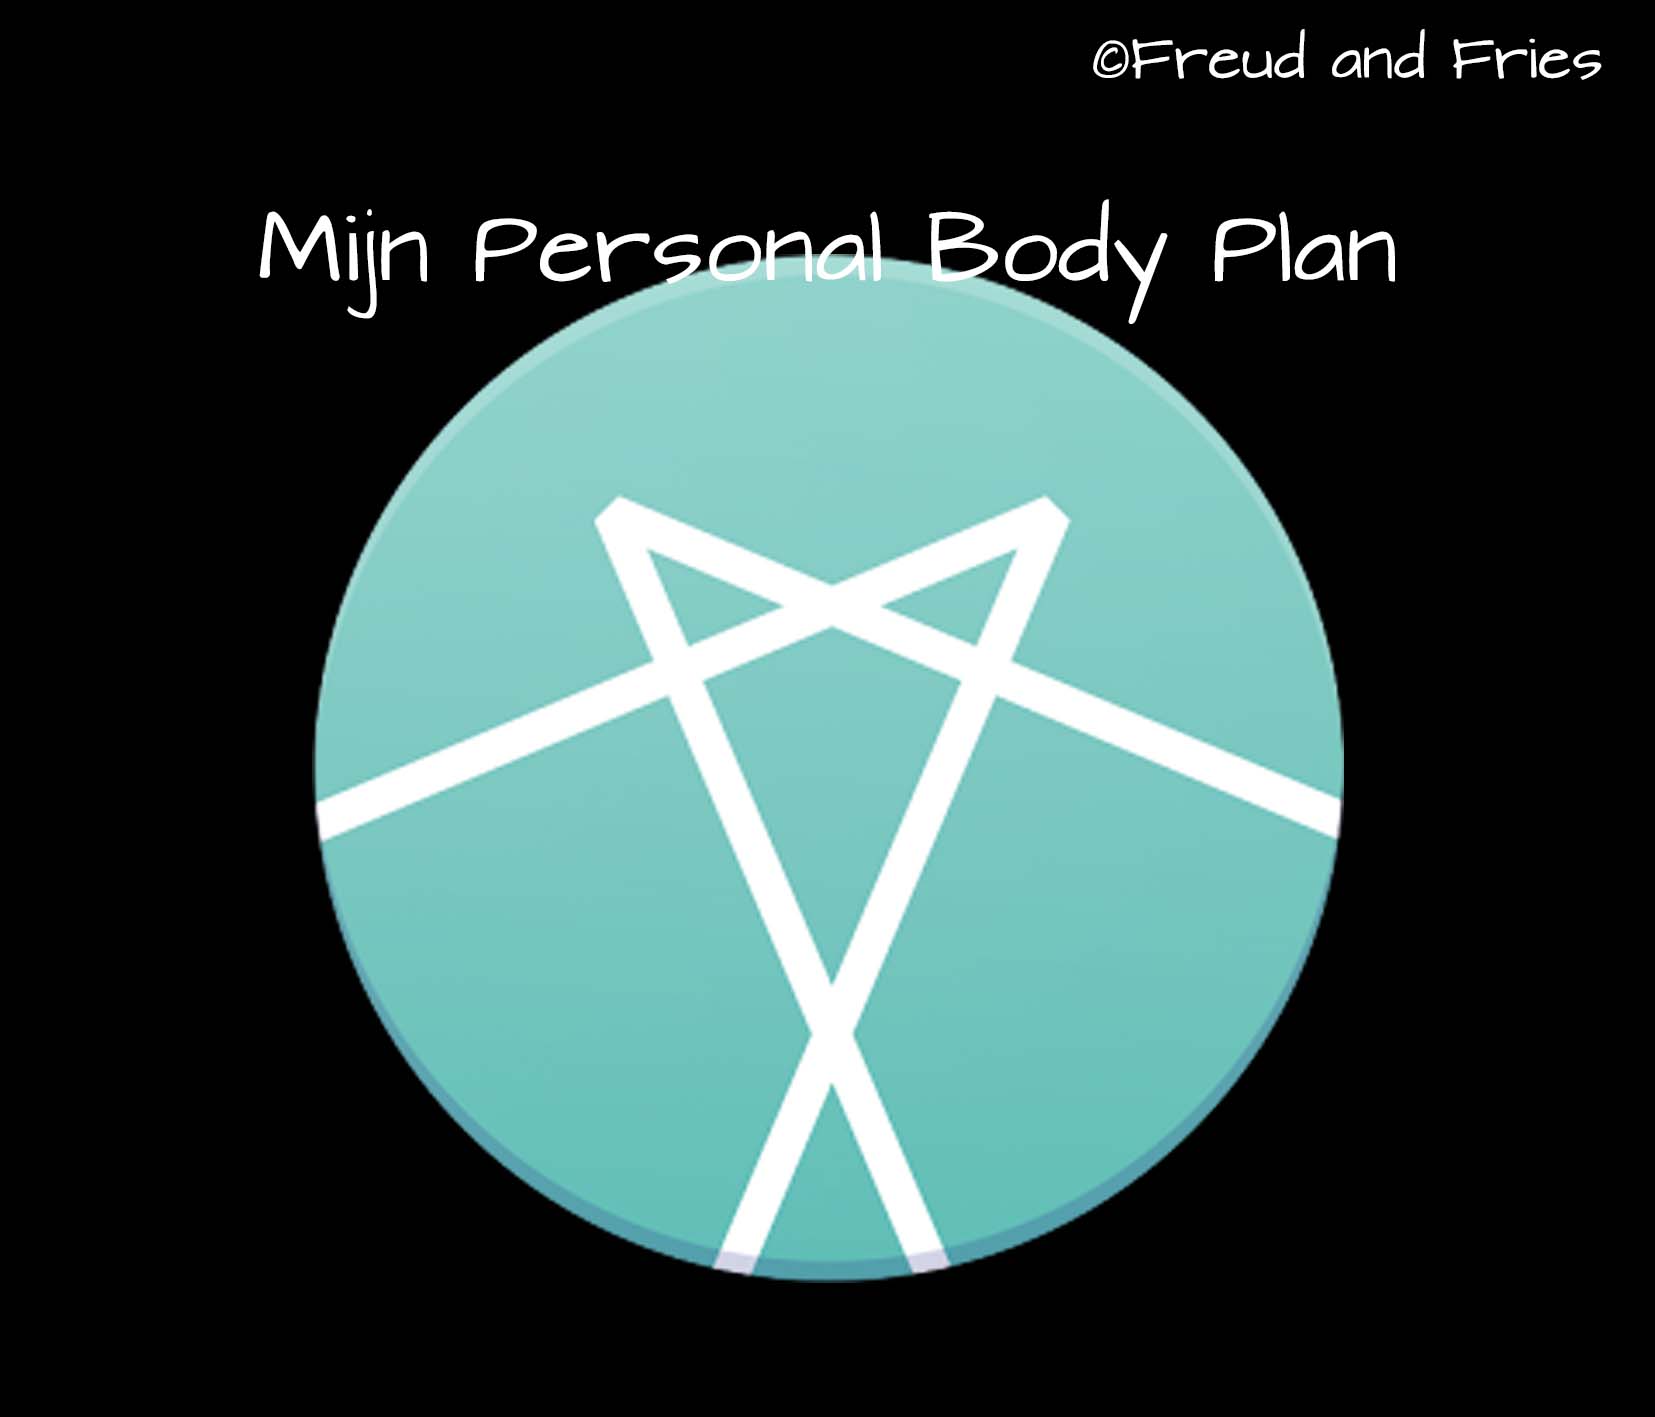 Mijn Personal Body Plan | Freud and Fries